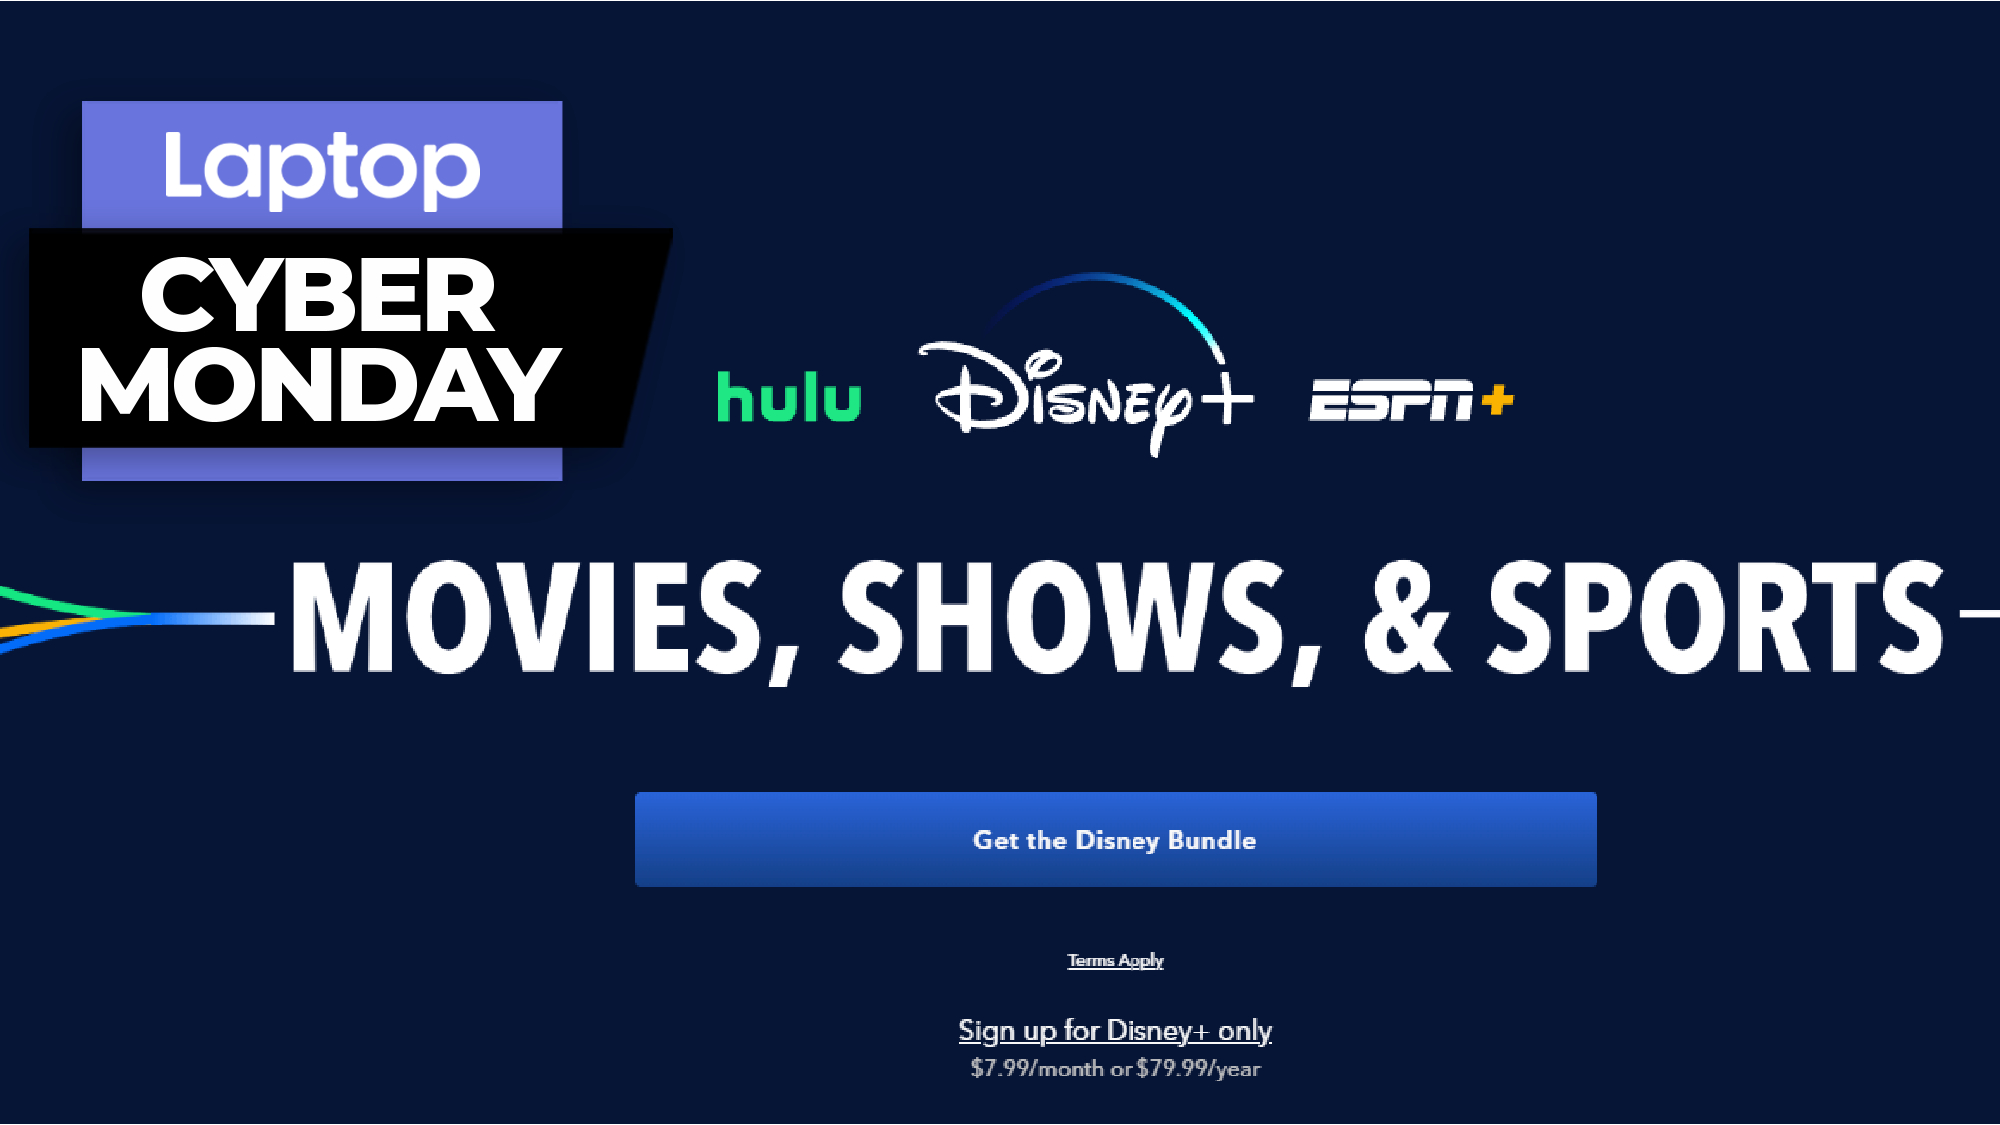 Disney Plus, ESPN+ and Hulu bundle is now 13.99 a month for Cyber